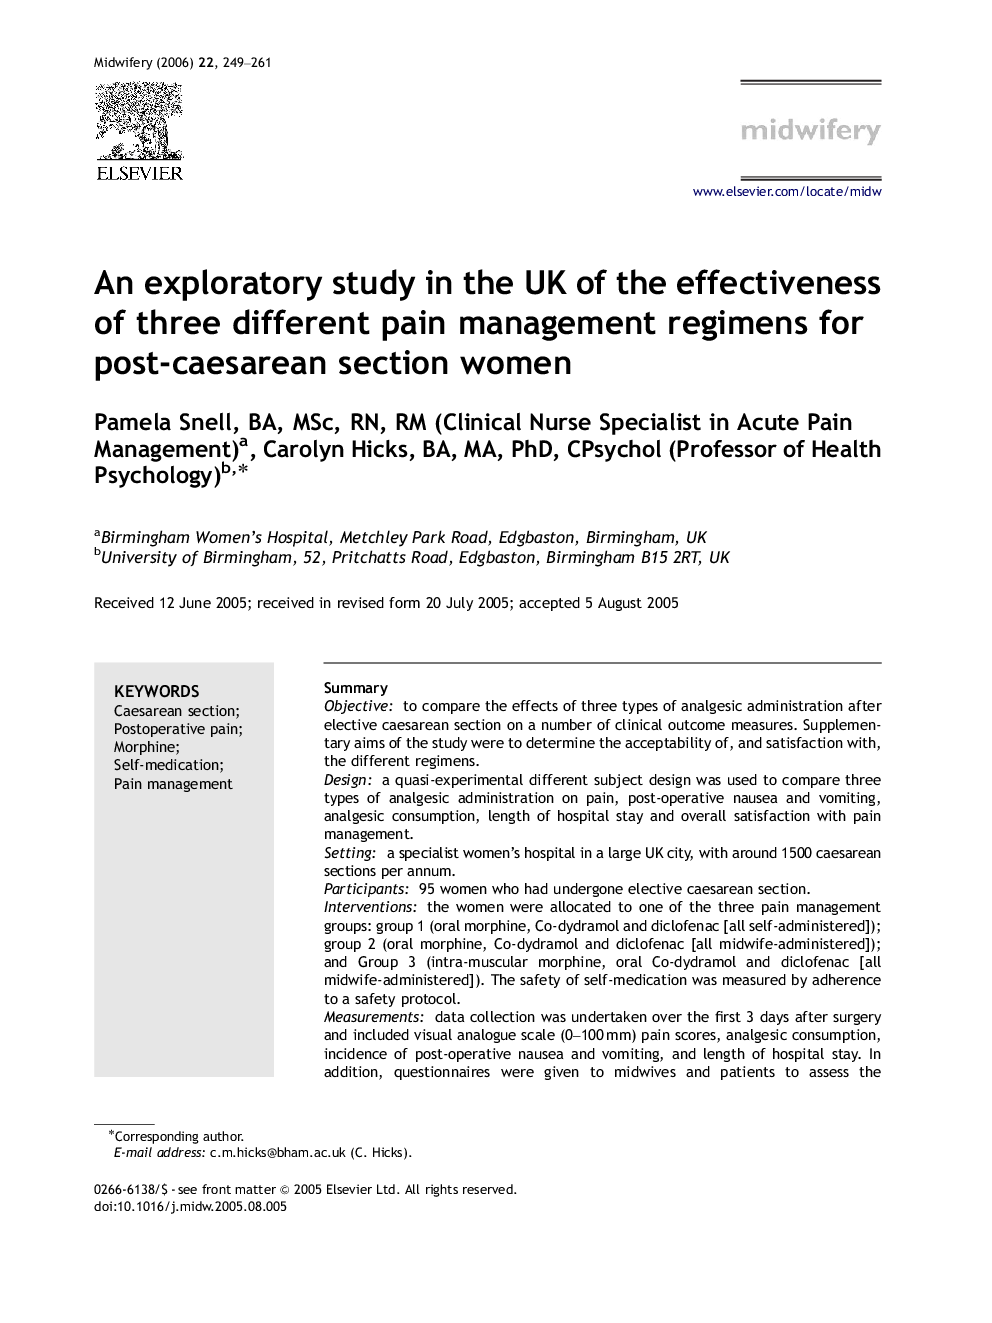 An exploratory study in the UK of the effectiveness of three different pain management regimens for post-caesarean section women